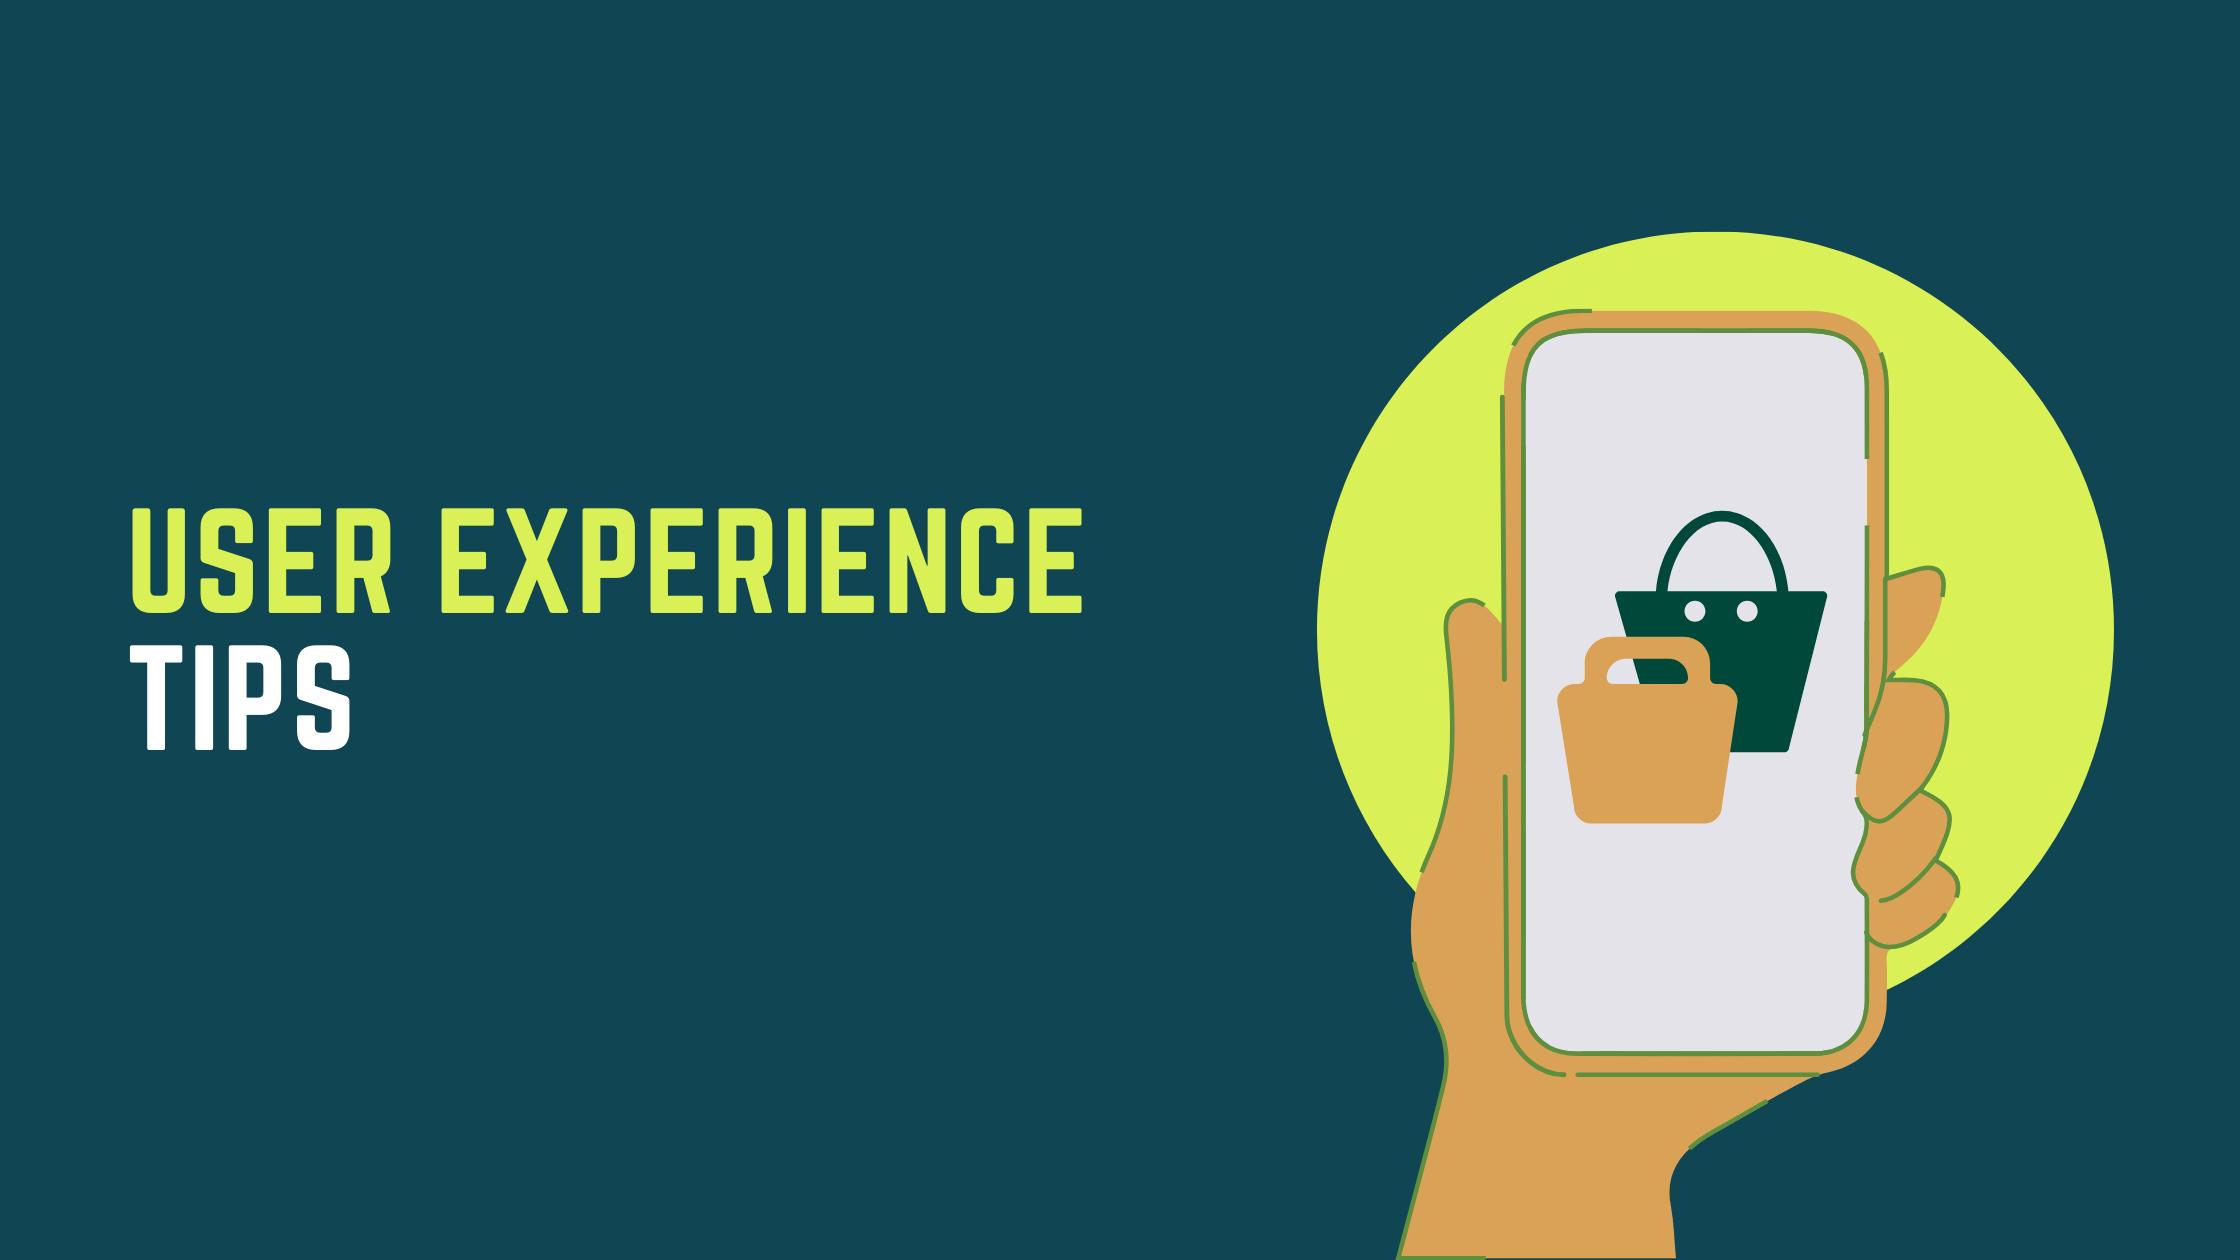 UX (User Experience) tips for your Shopify store